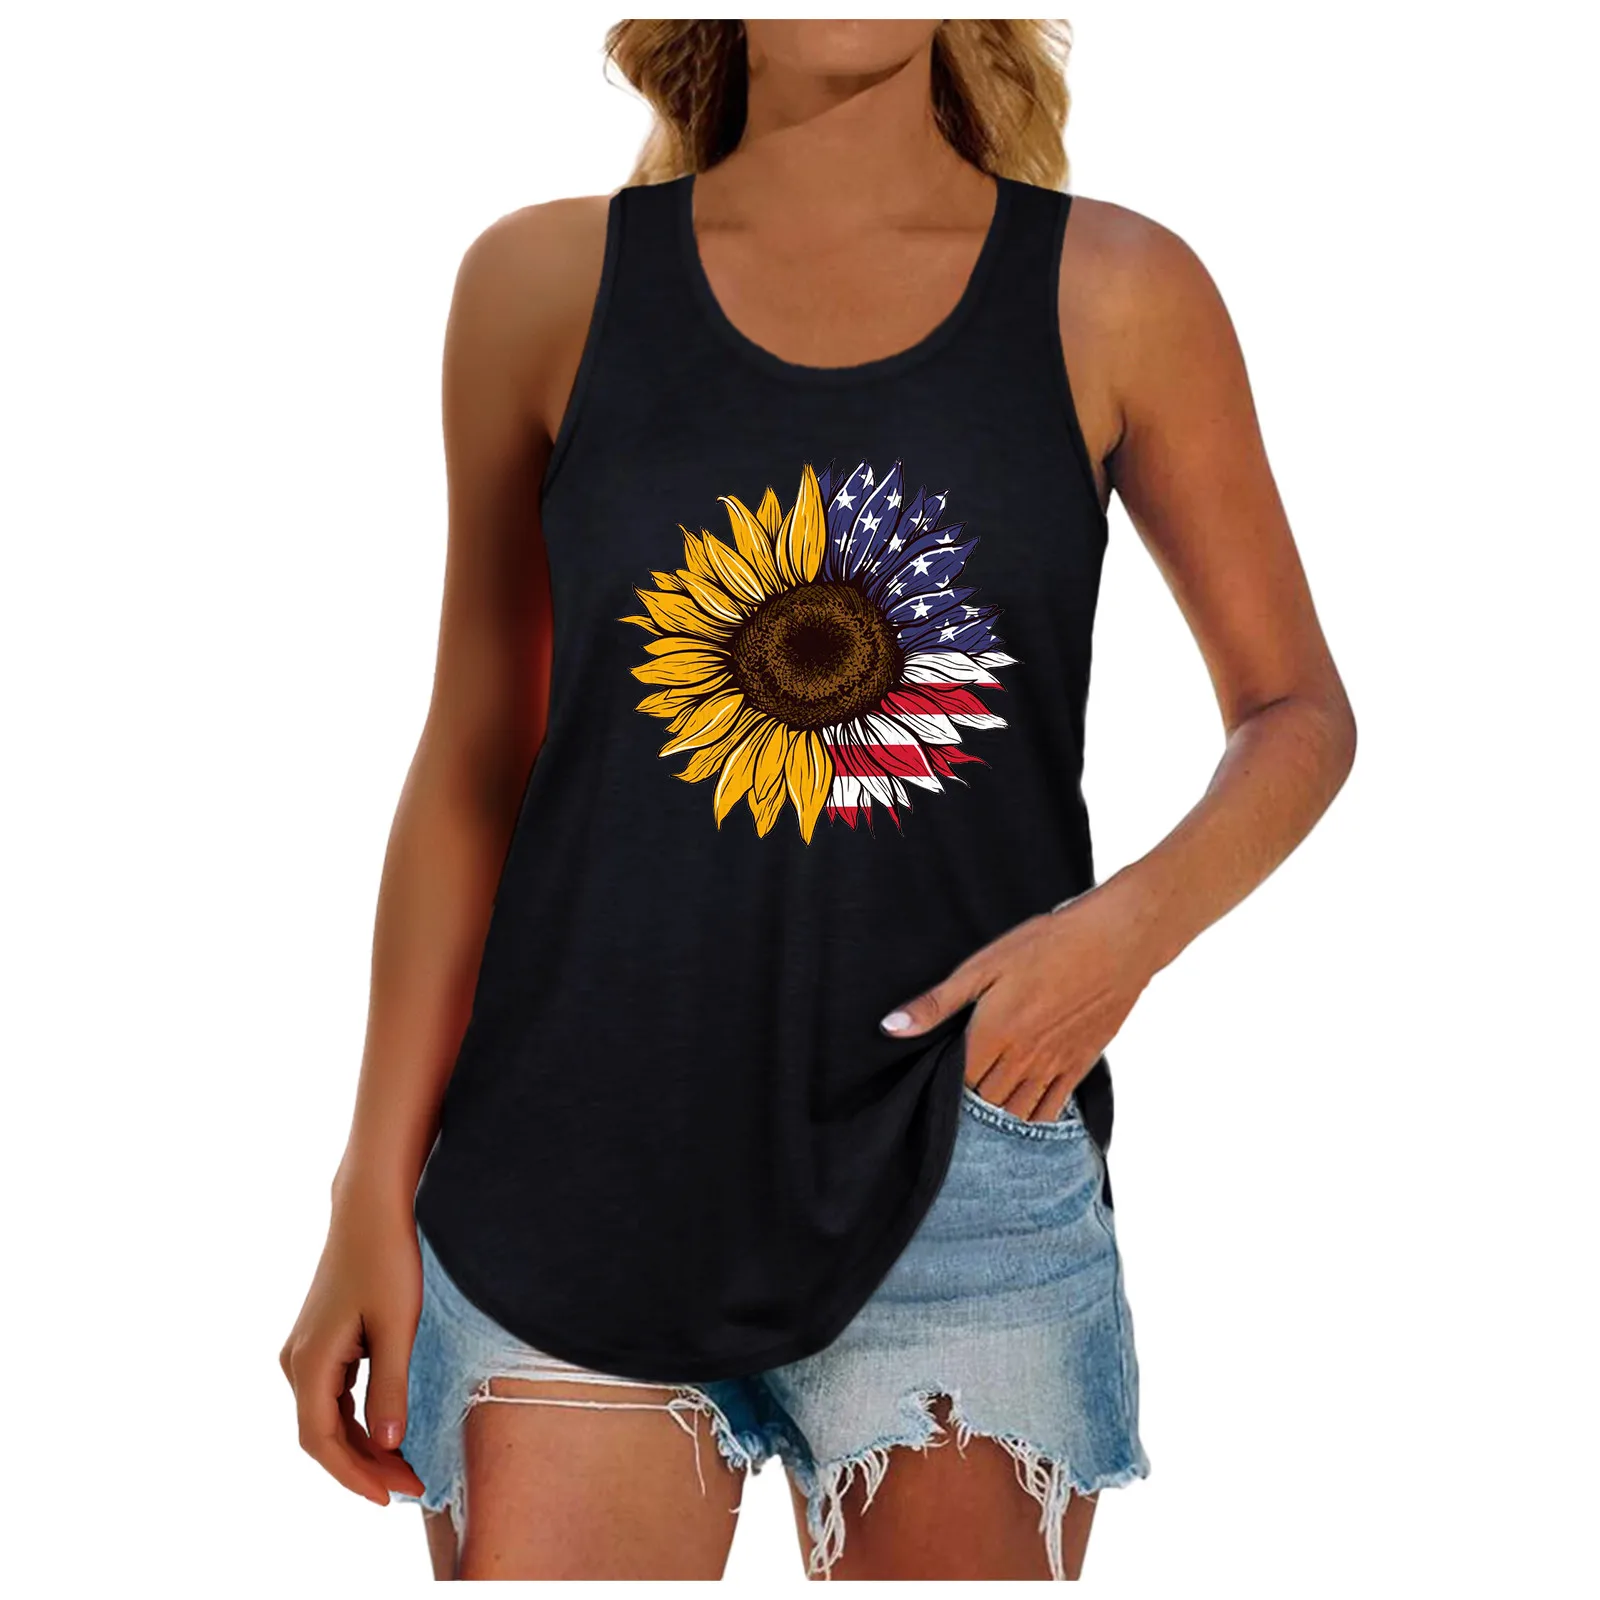 

Womens Top Summer Sleeveless Independence Day Sunflower Printed Racerback Tank Tops Casual Vest Camisole Shirt Plus Size Blouse